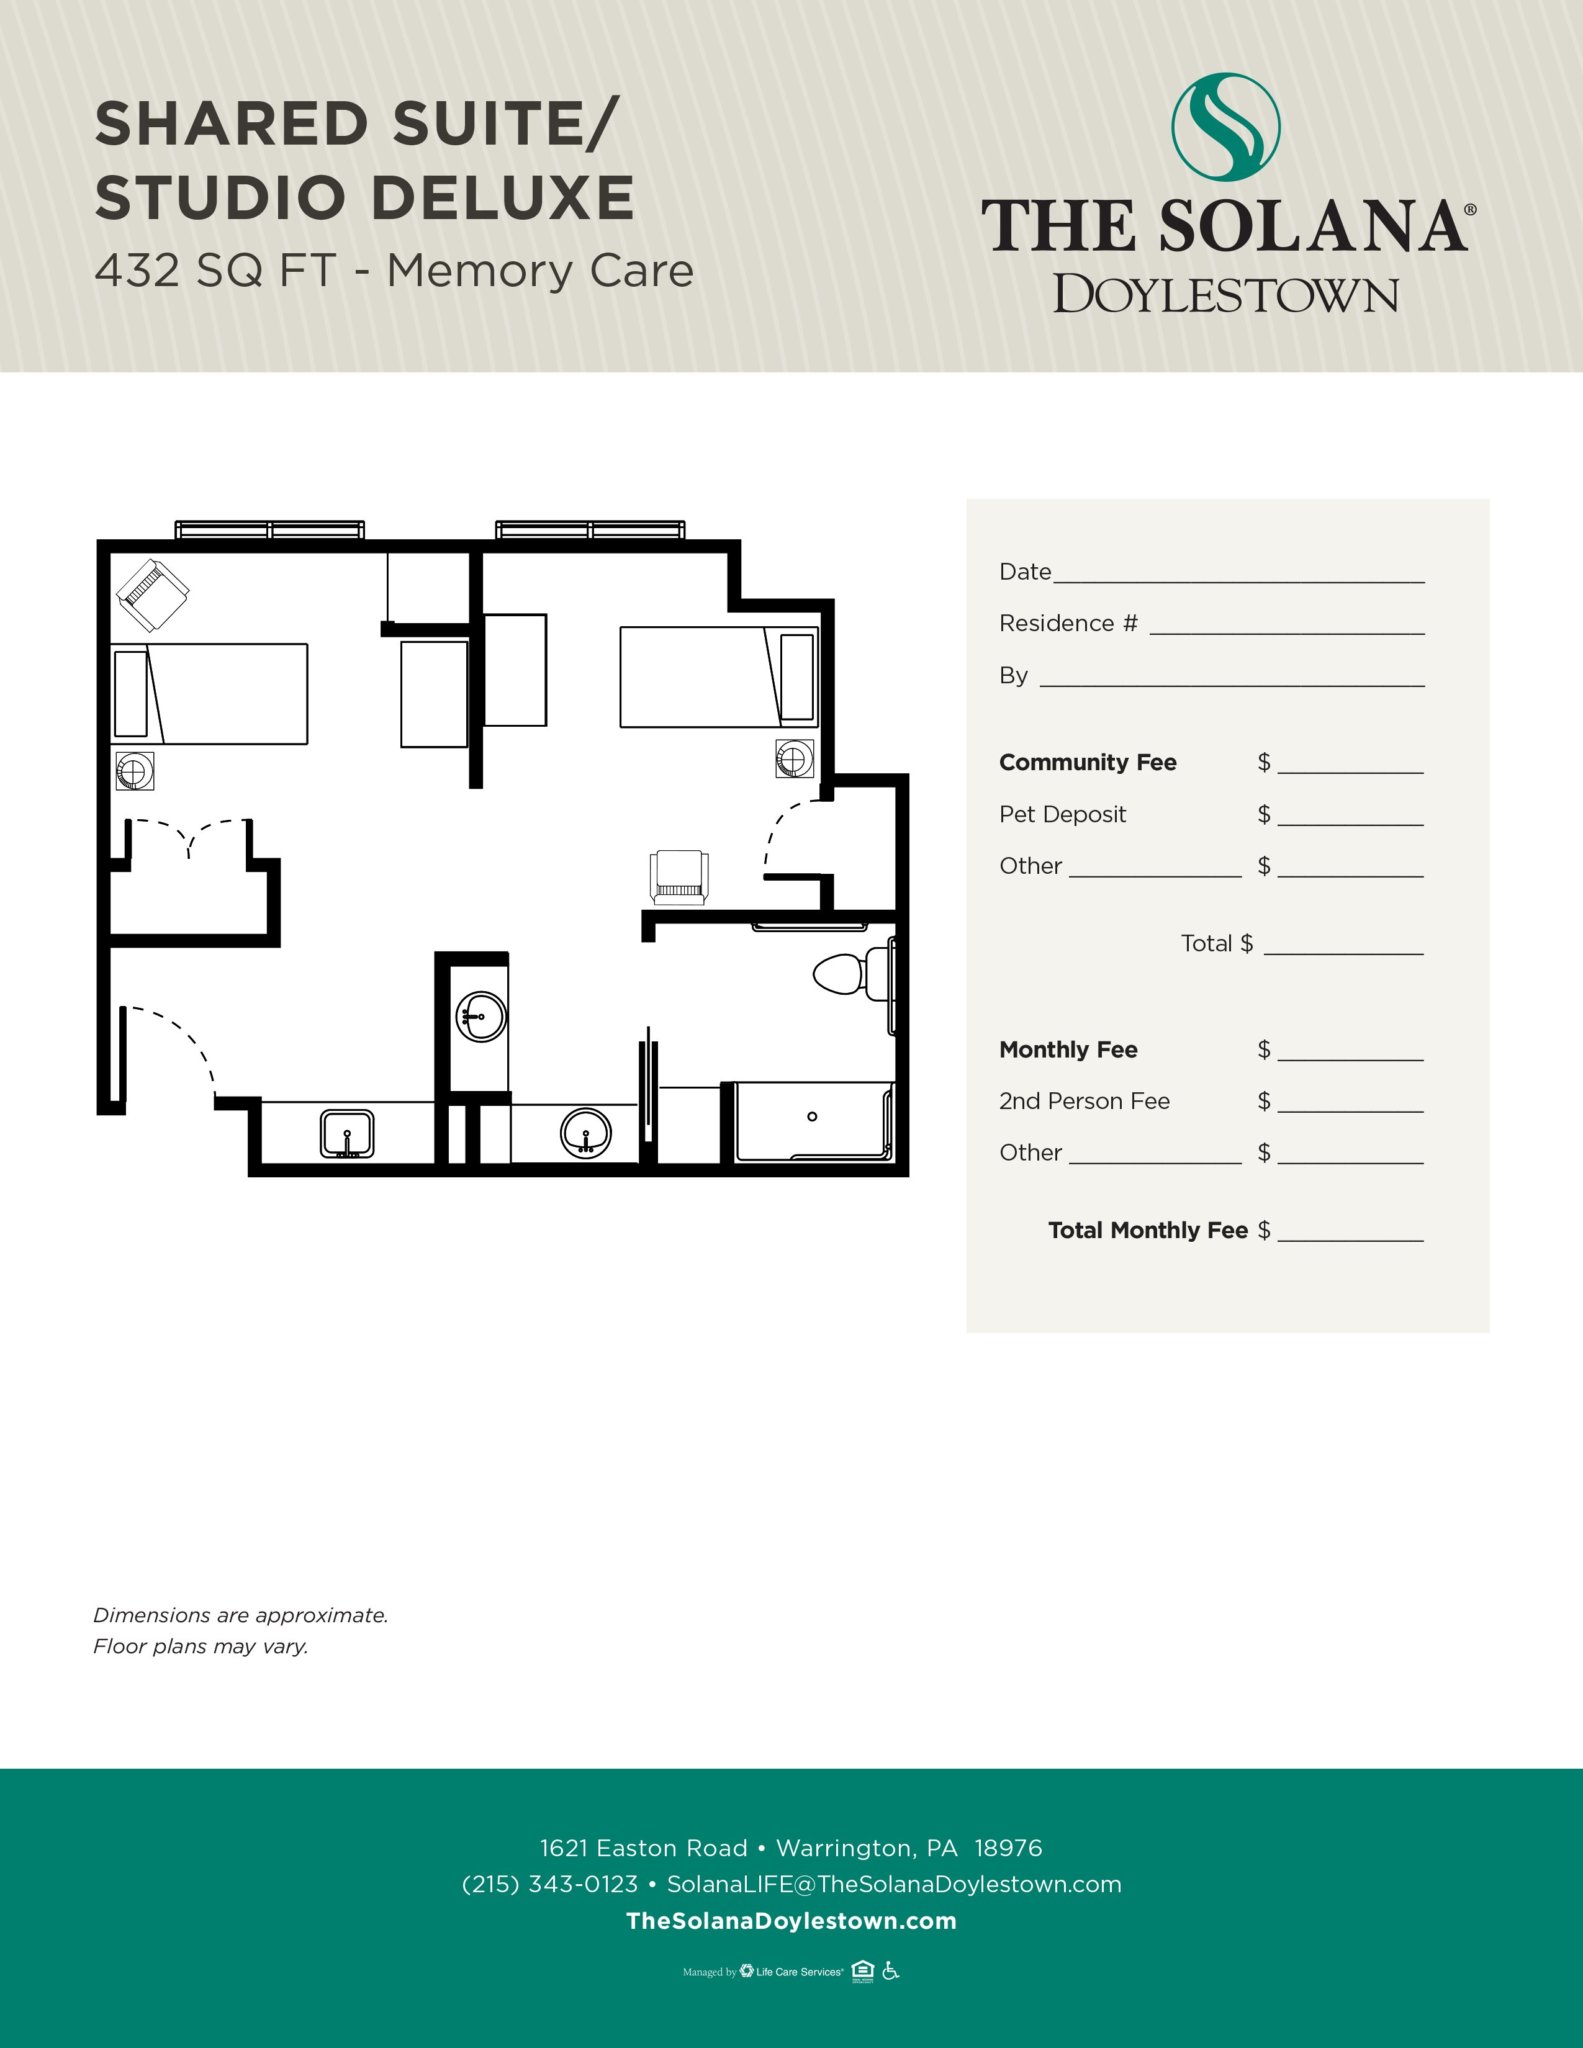 Floor plan of a shared suite or studio deluxe unit measuring 432 sq ft for memory care.